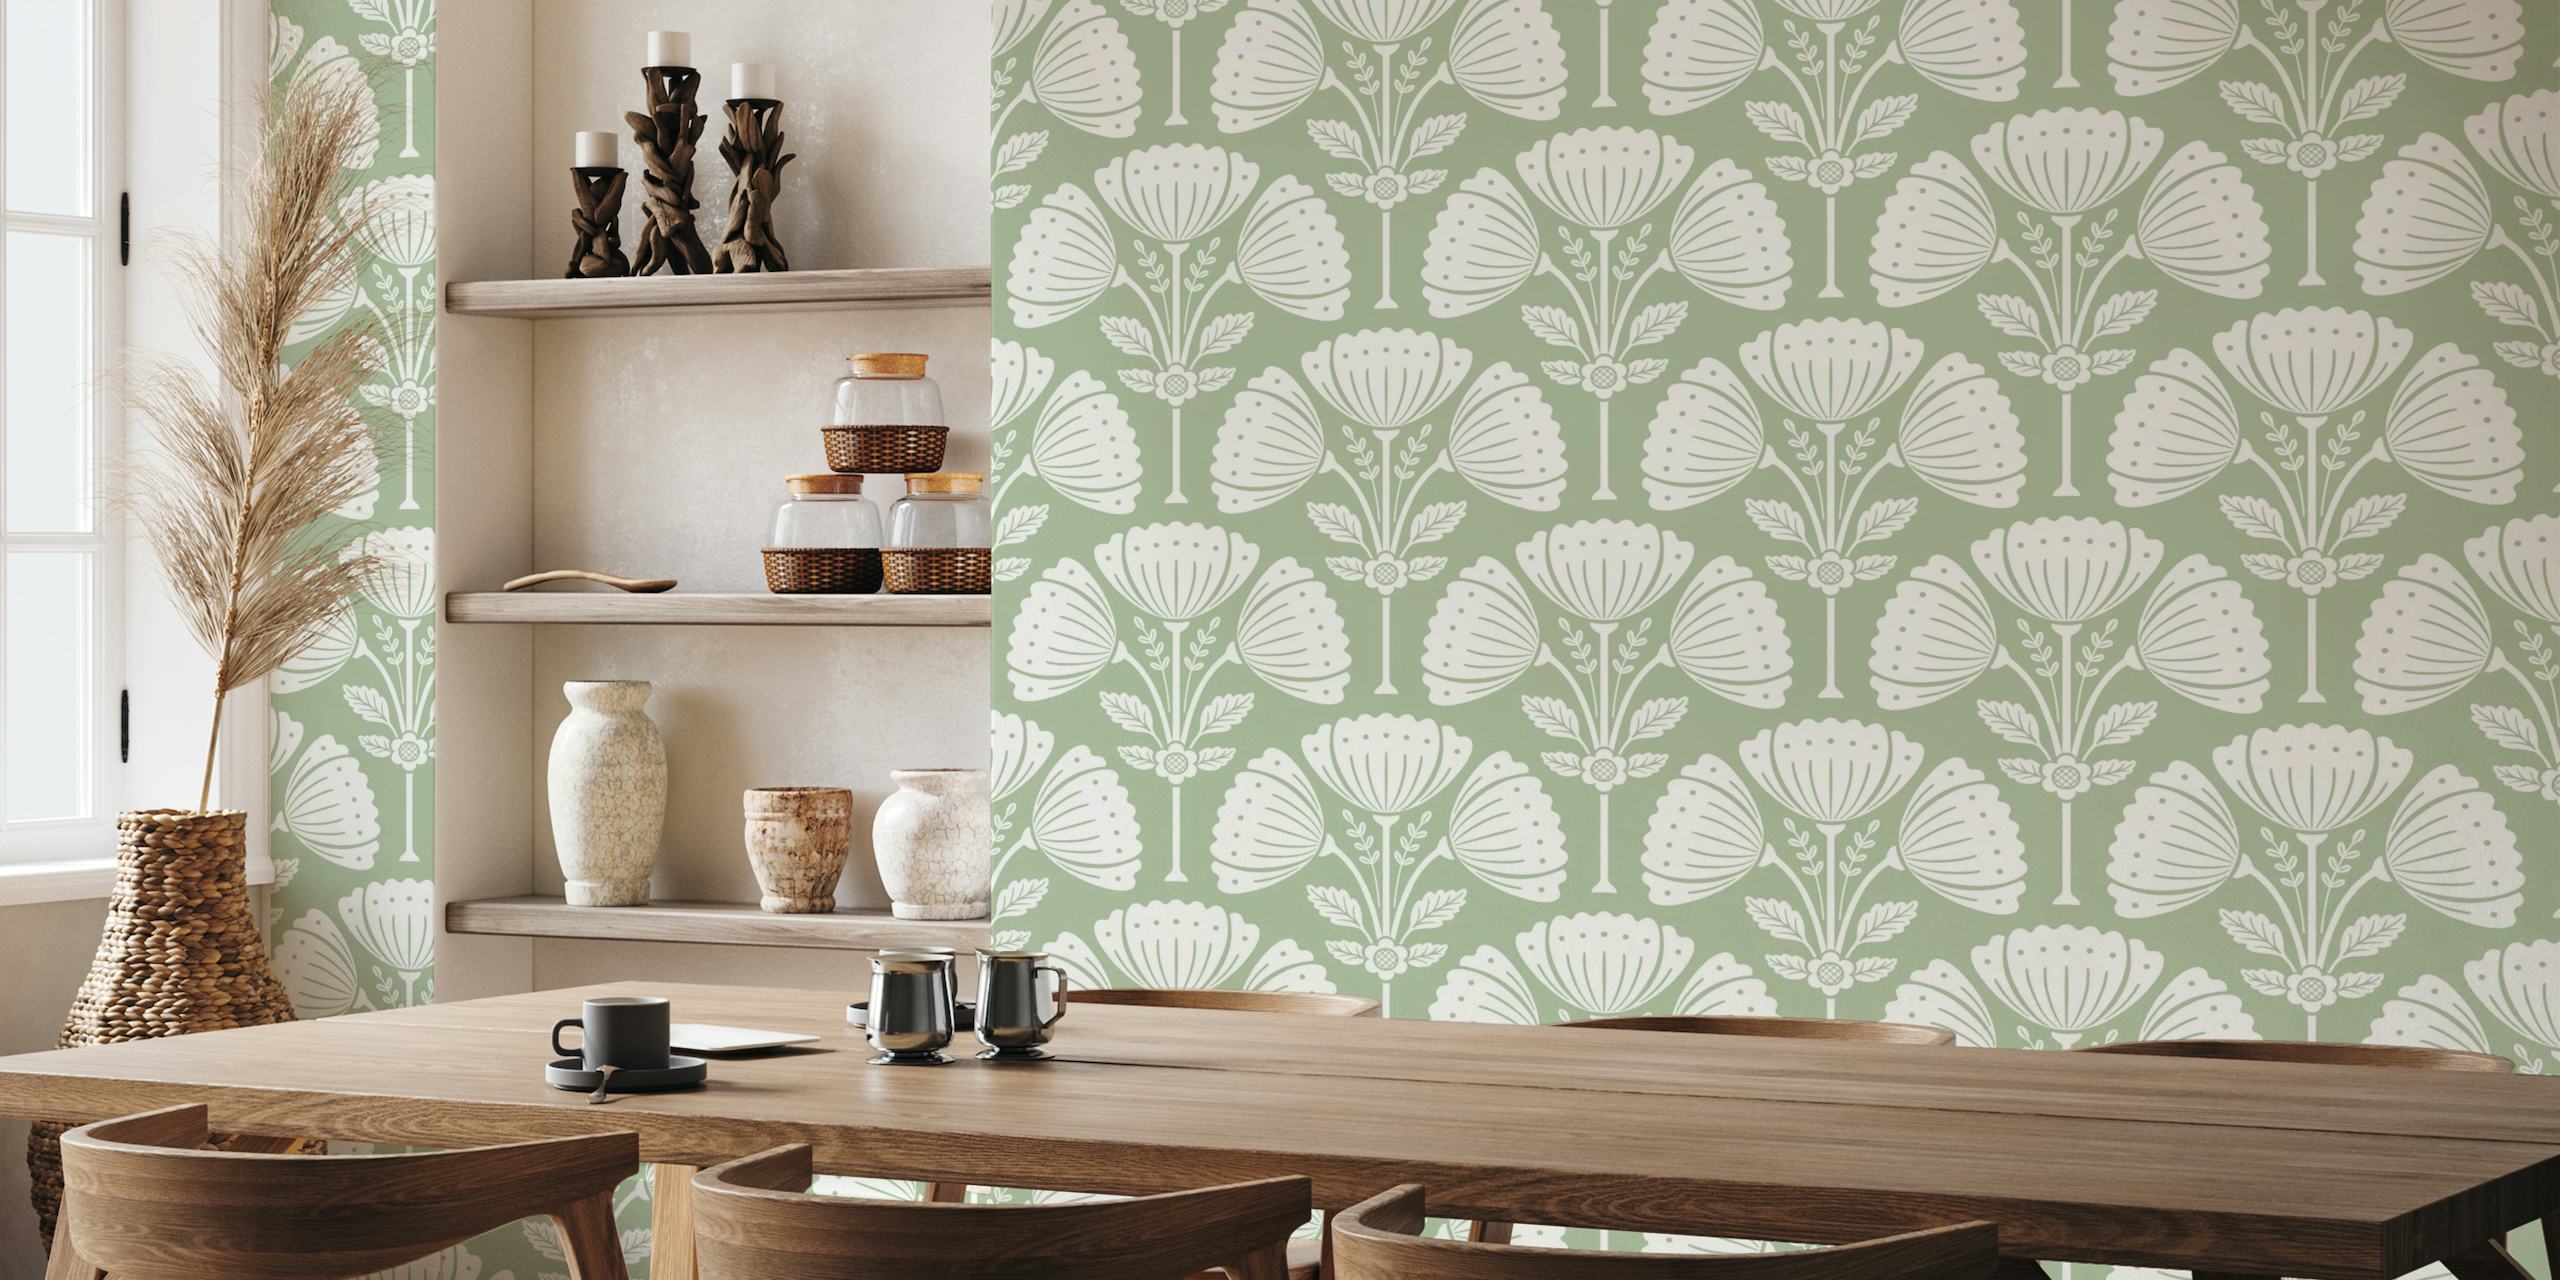 Block print style floral bouquet wall mural in sage green